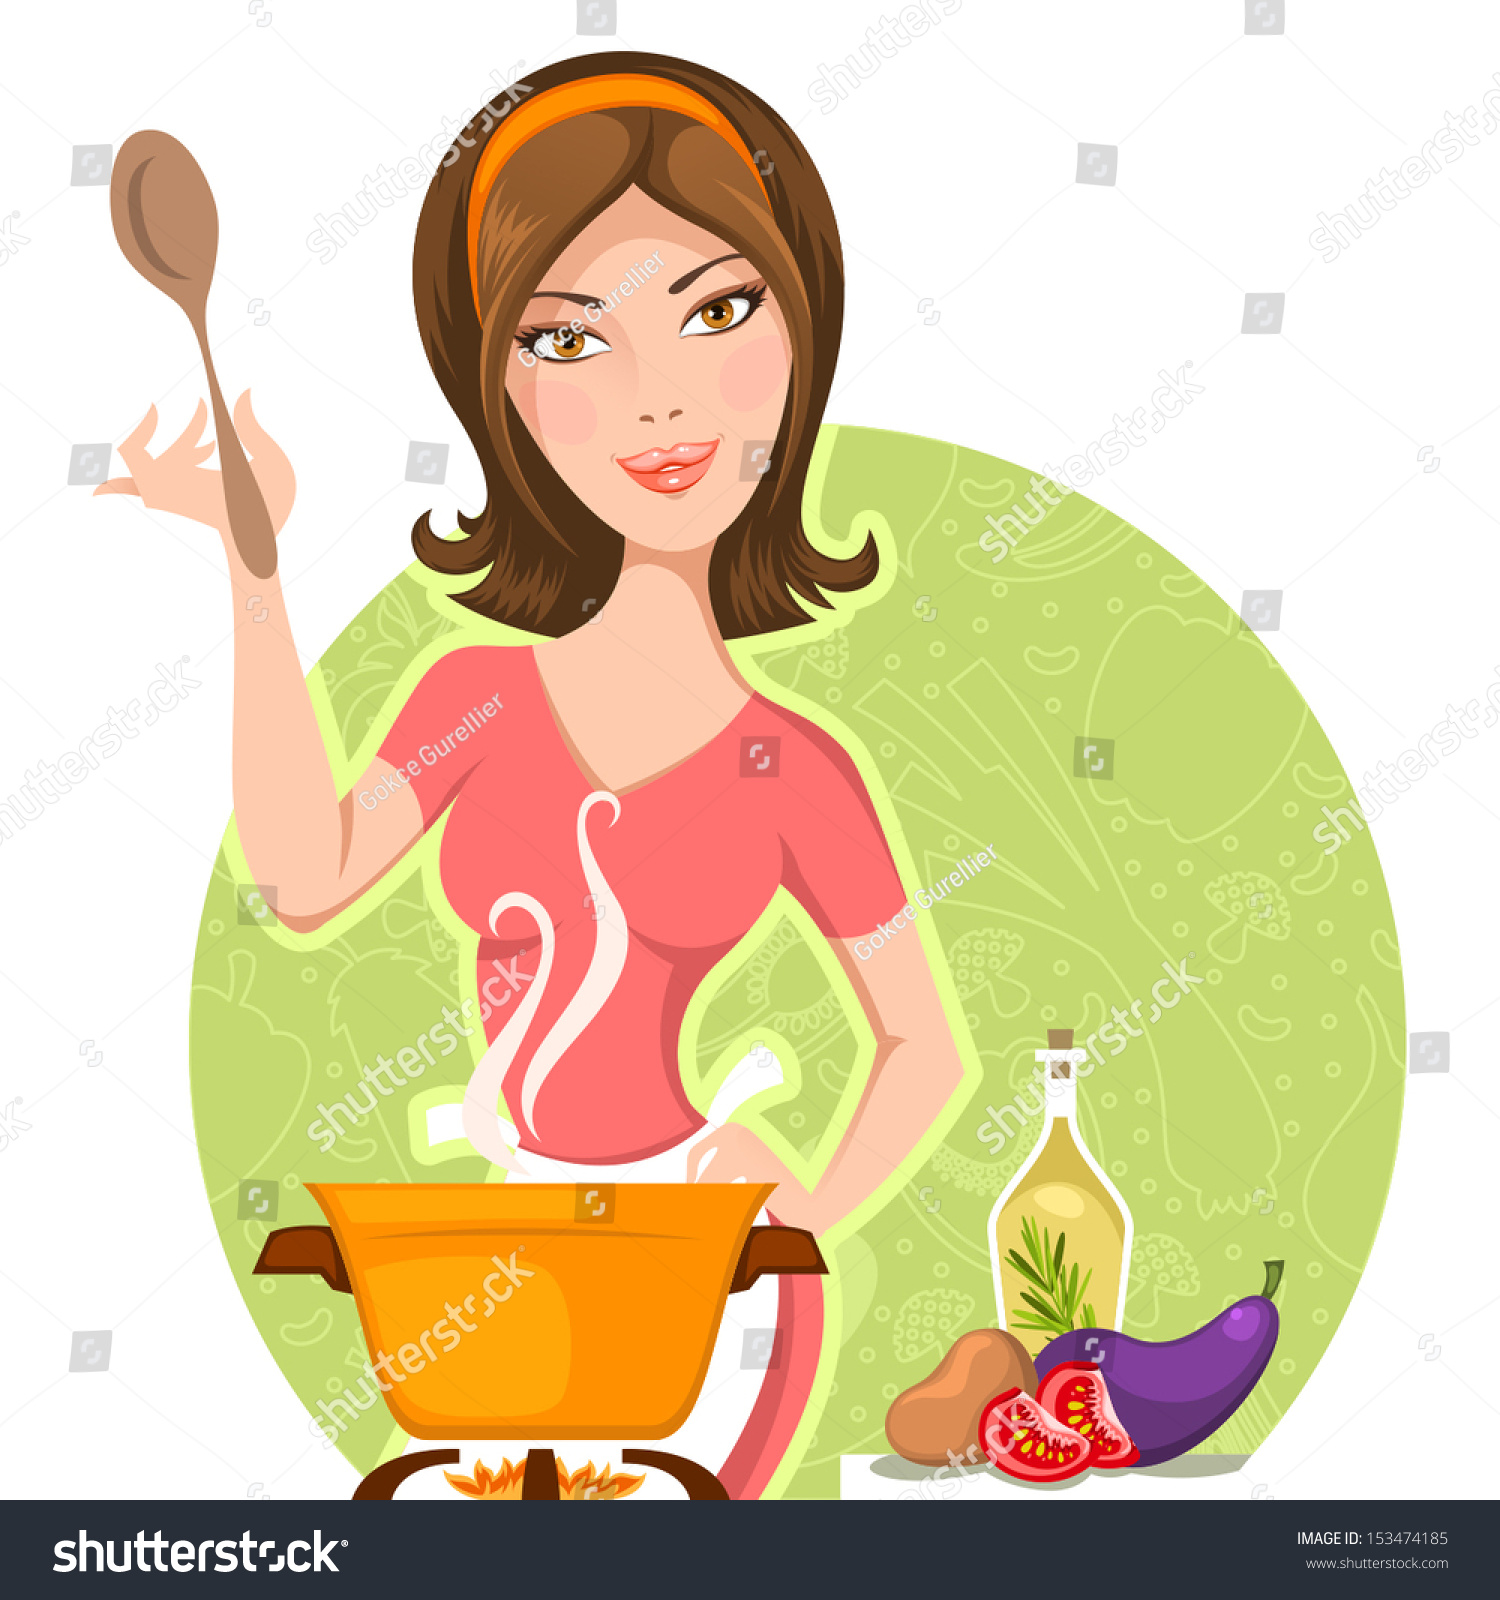 clipart woman cooking food - photo #3